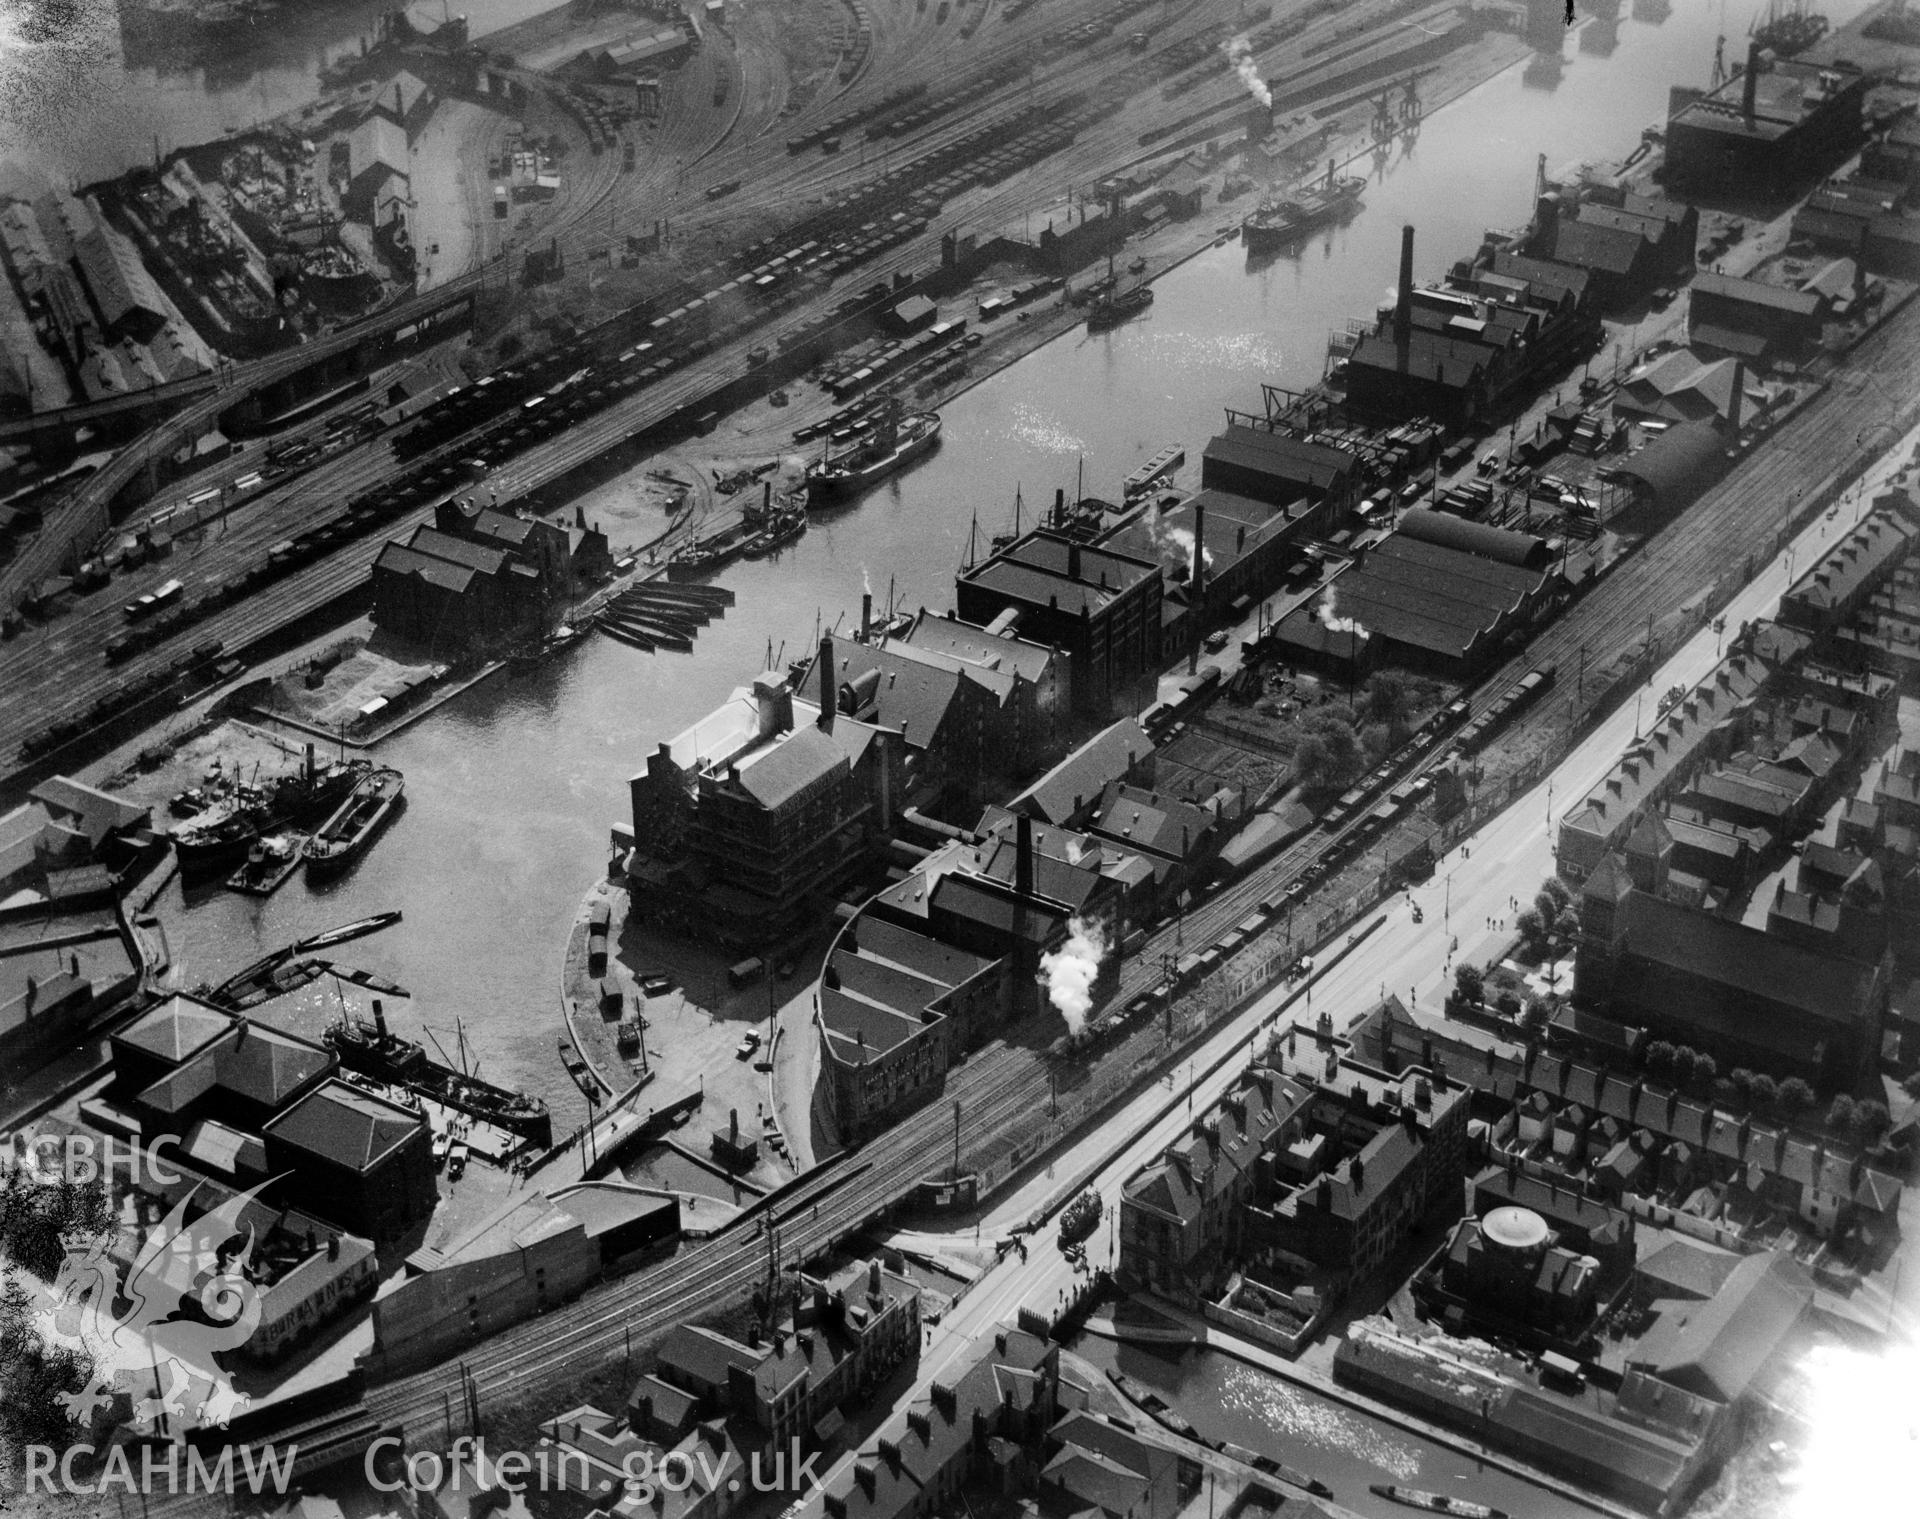 View of Bute East Dock, Cardiff showing the Spillers Factory, oblique aerial view. 5?x4? black and white glass plate negative.